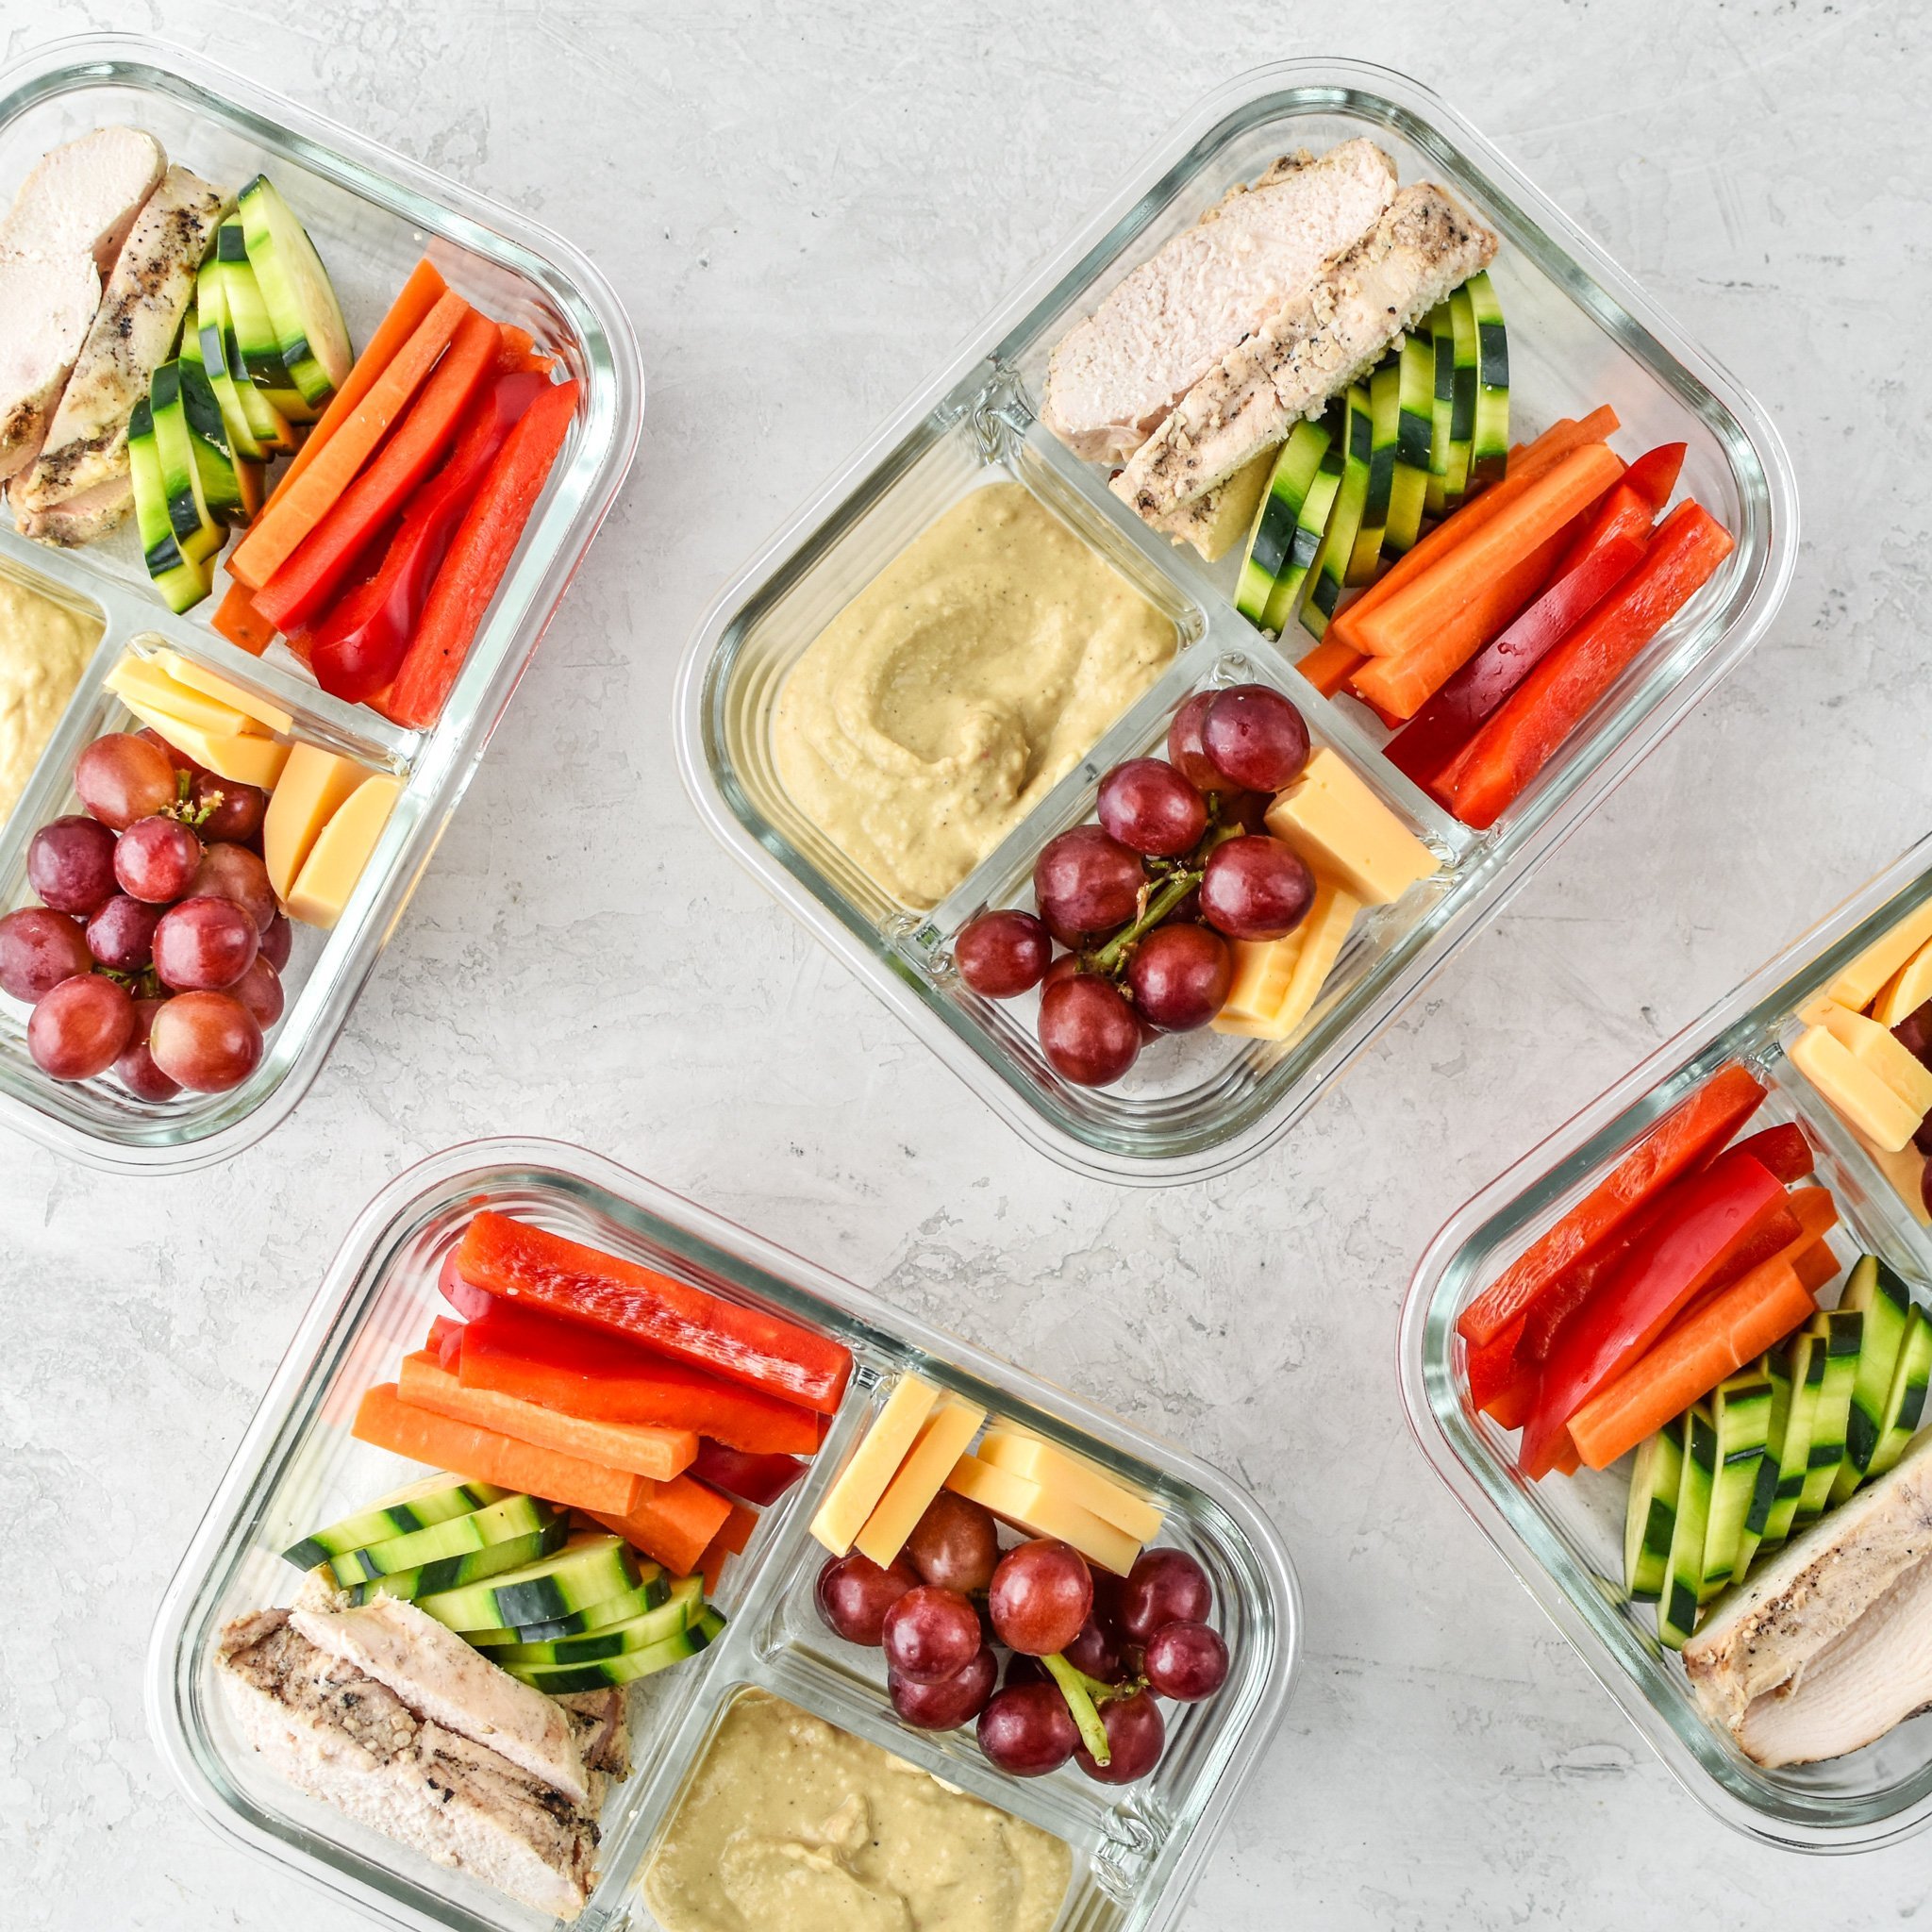 Chicken & hummus place meal prep in 3 compartment containers.